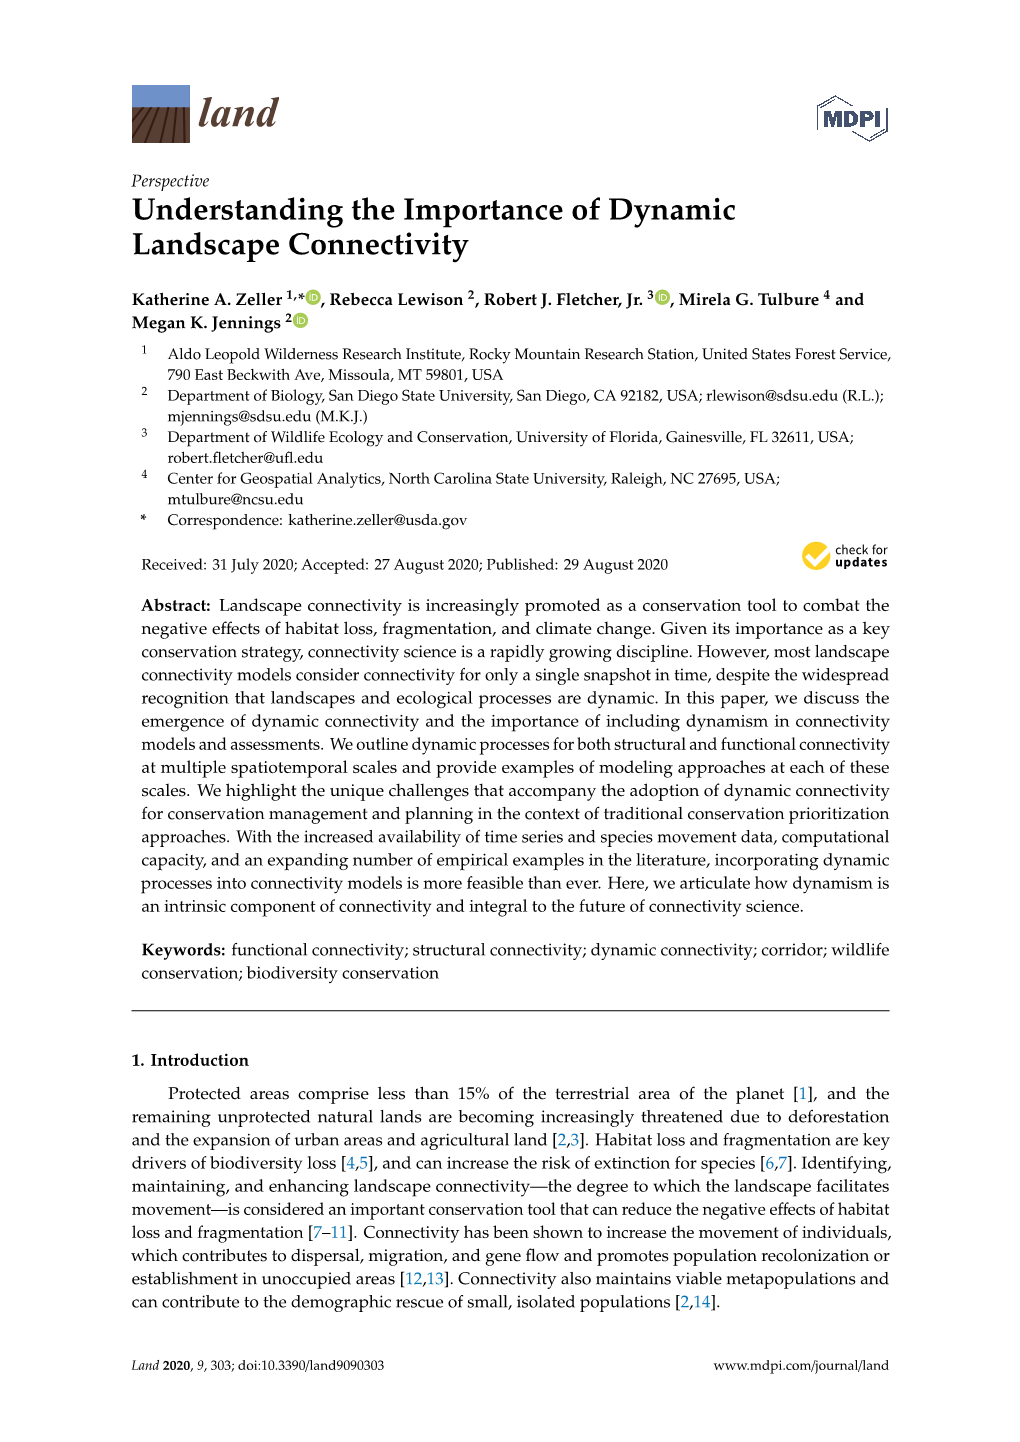 Understanding the Importance of Dynamic Landscape Connectivity